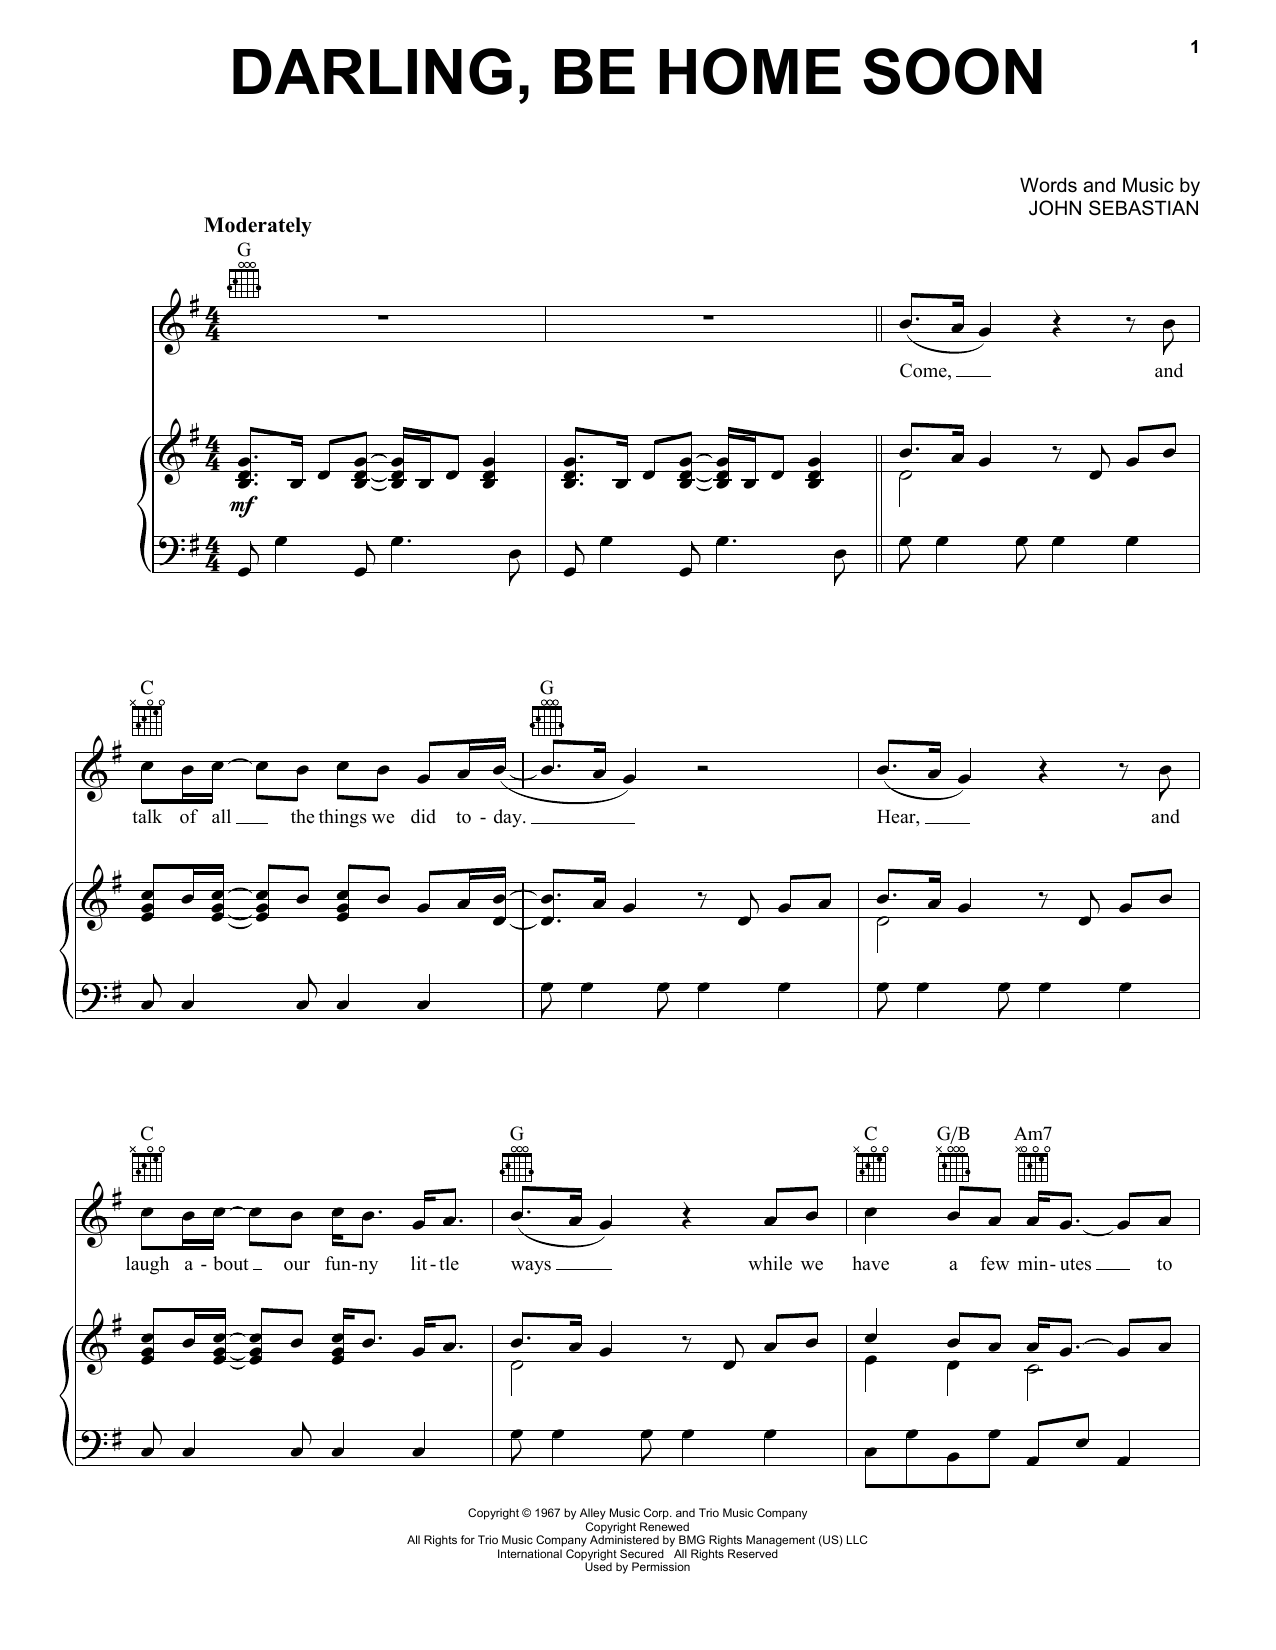 Download The Lovin' Spoonful Darling, Be Home Soon Sheet Music